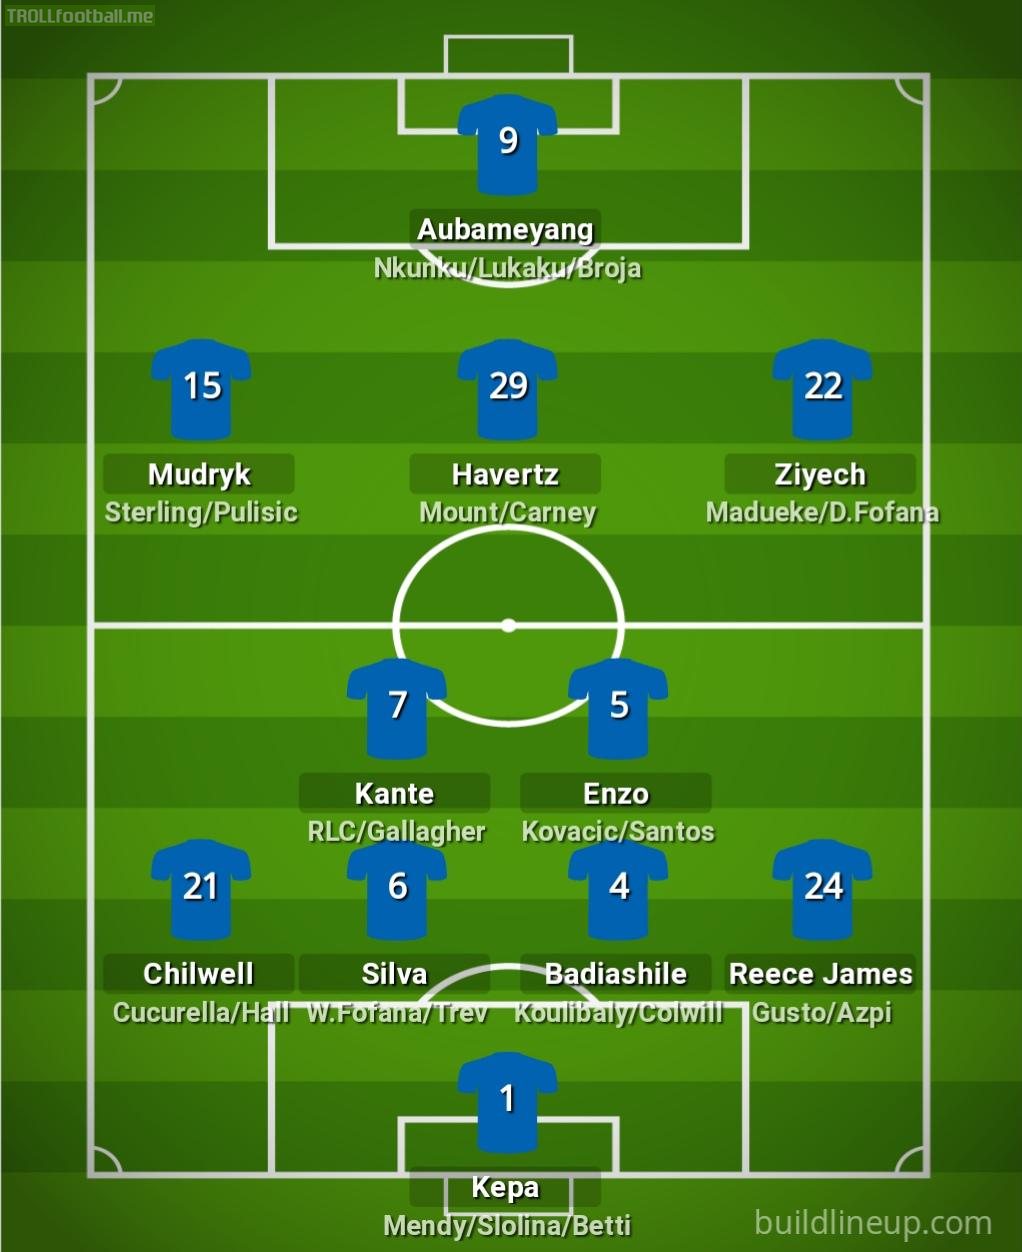 Chelsea's current squad depth (excluding players loaned to them)